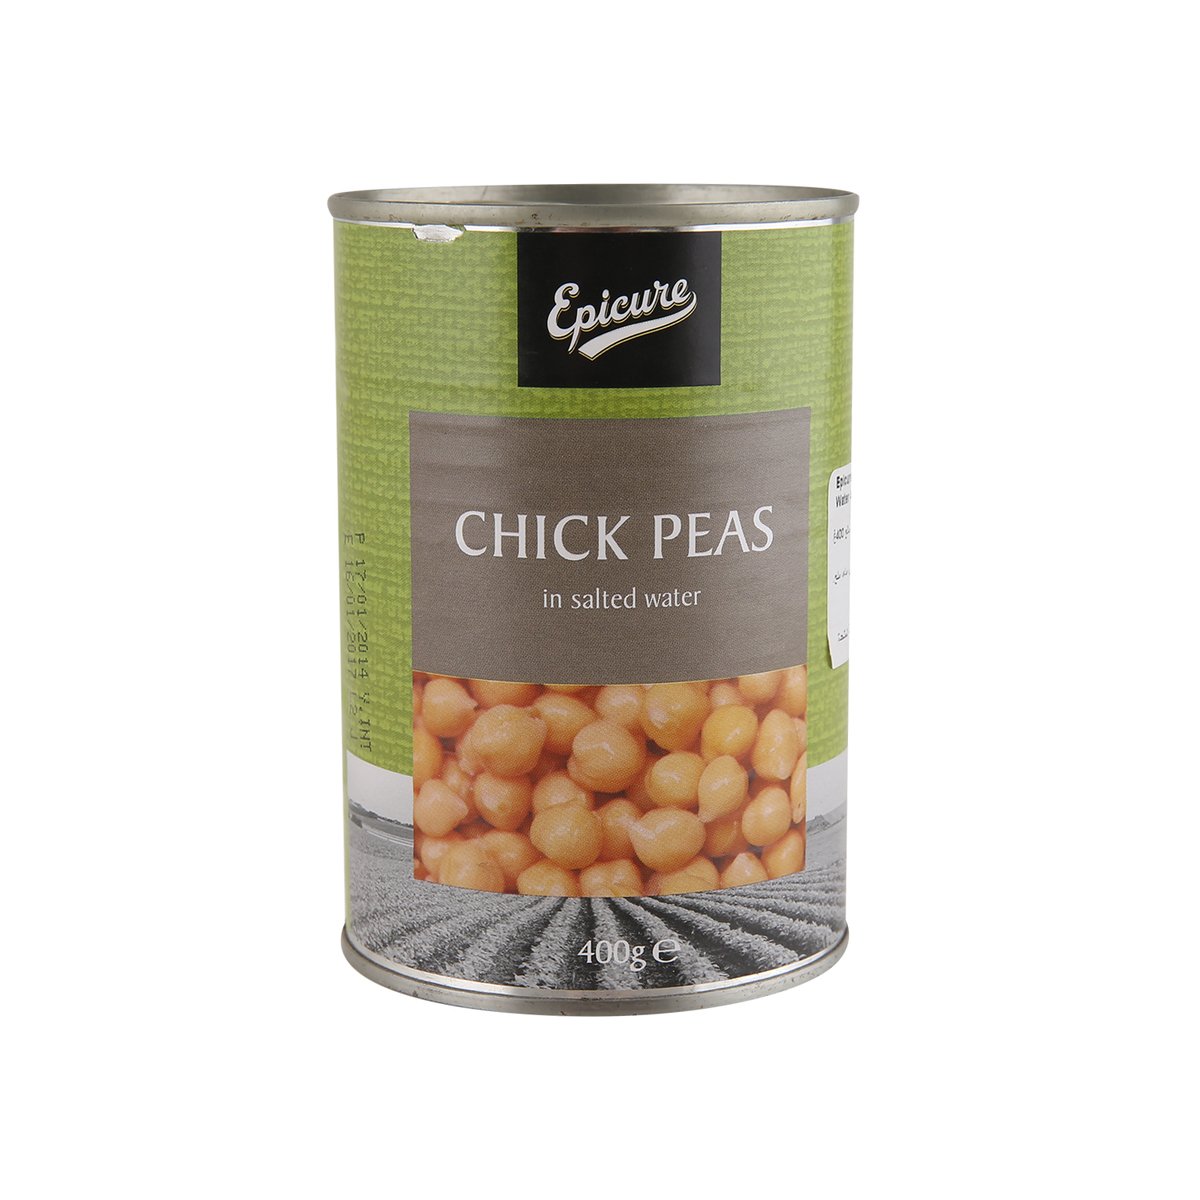 Epicure Chick Peas In Salted Water 400g